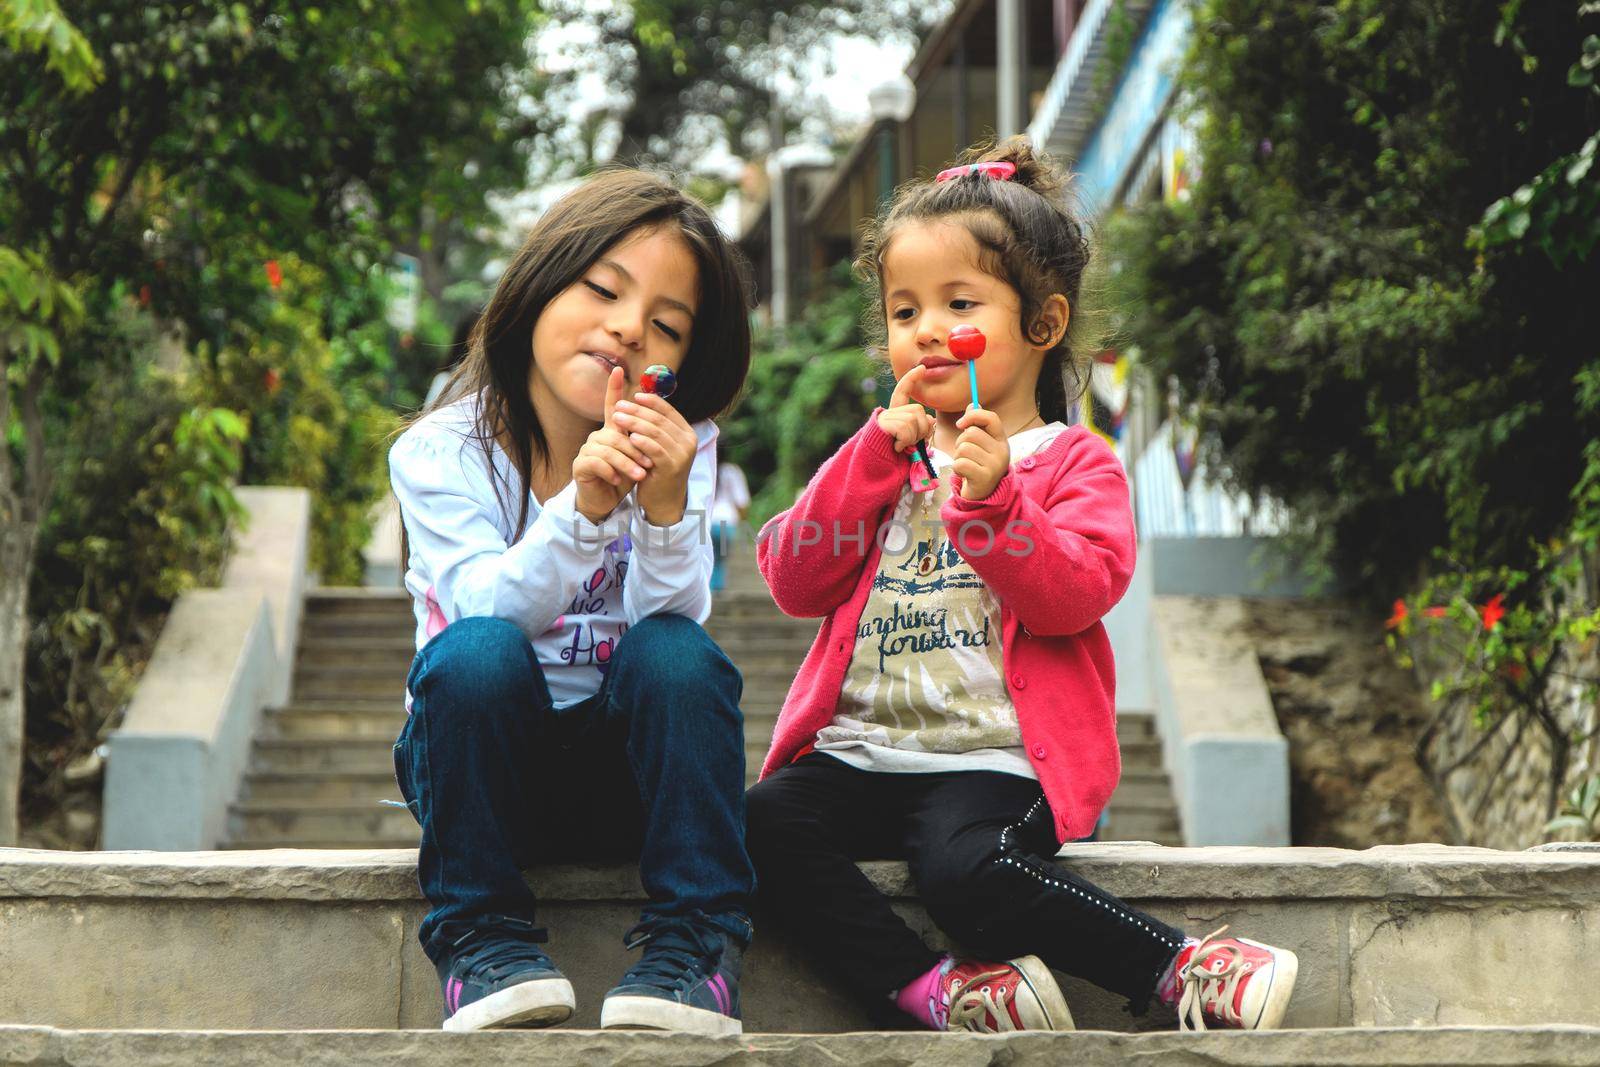 Two girls sitting and eating a lollipop in the park, summer outdoor portrait. best friends. by Peruphotoart